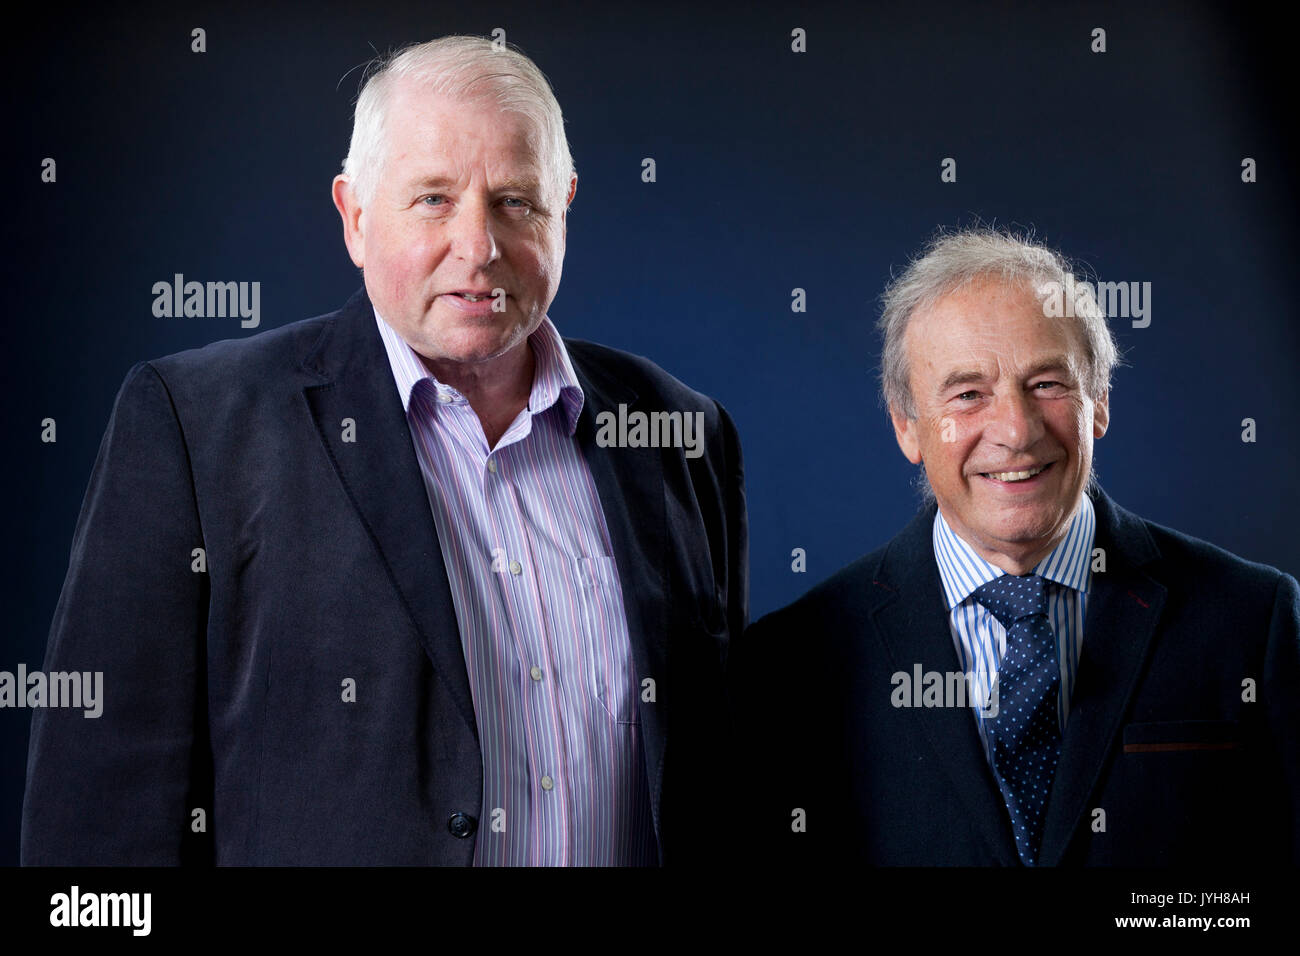 Edinburgh, UK. 20th Aug, 2017. Alan Mckirdy (left), the geologist and author & John Peacock, the cosmologist and astronomer, appearing at the Edinburgh International Book Festival. Credit: GARY DOAK/Alamy Live News Stock Photo